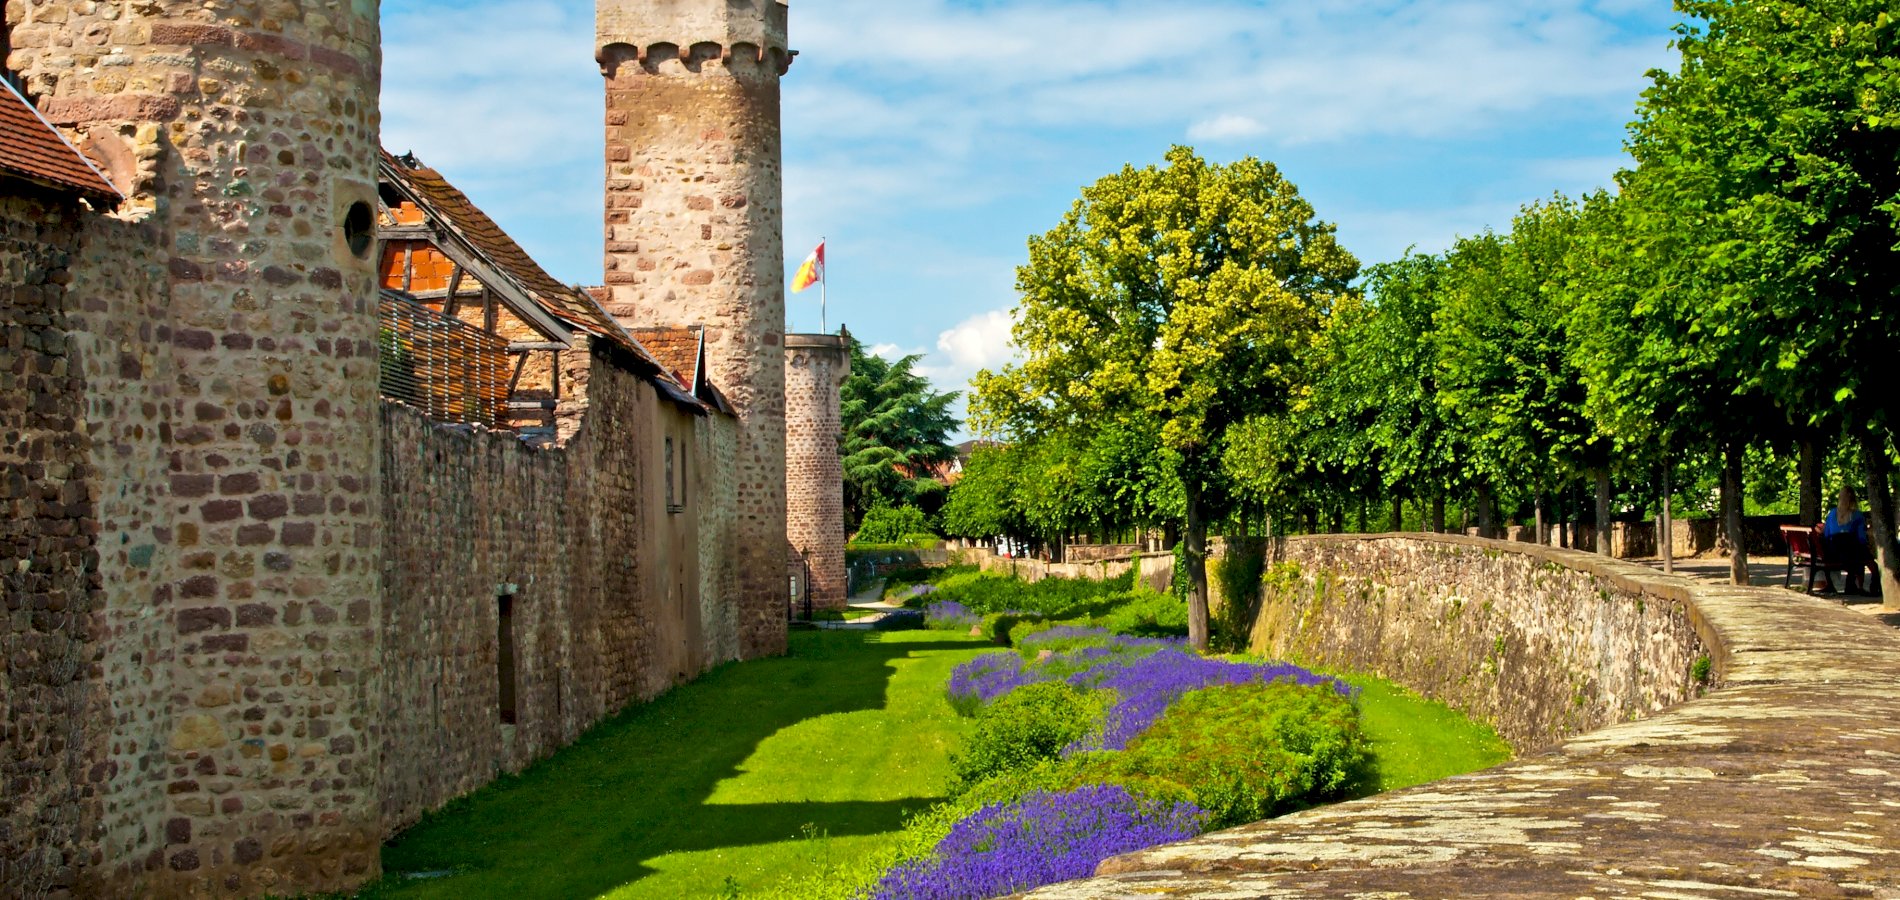 Ophorus Tours - A Private Half Day Trip From Strasbourg to Obernai Village & Mont Saint Odile